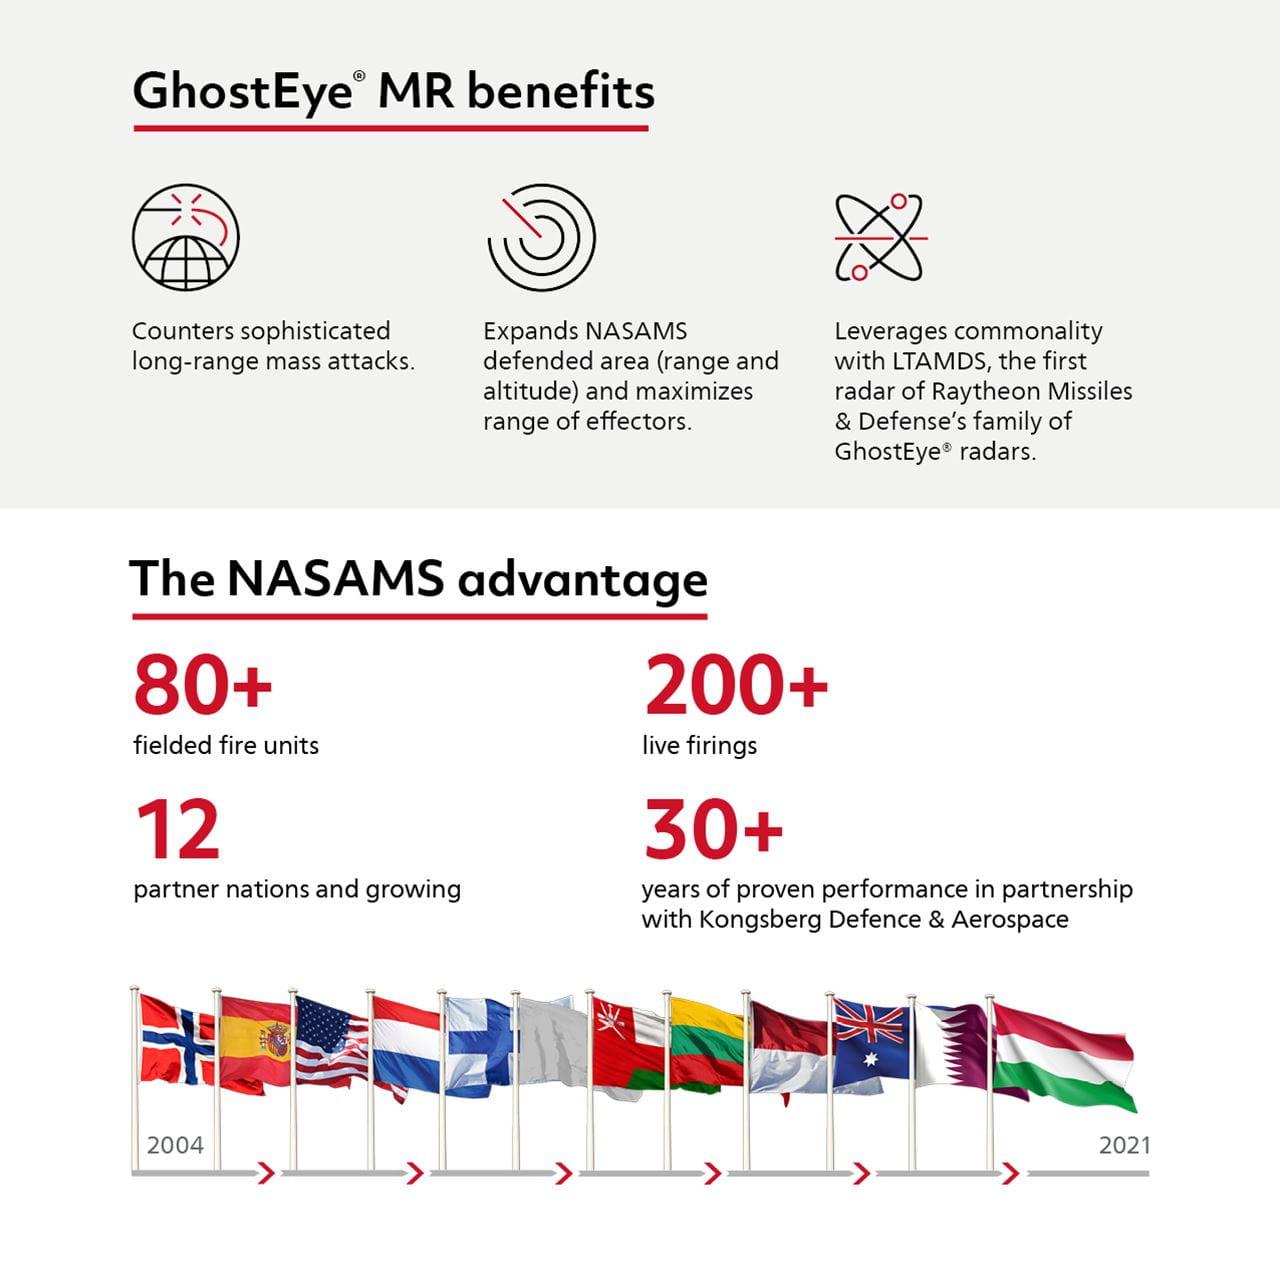 As sophisticated threats evolve, so too does NASAMS with GhostEye MR. The system’s open architecture allows technology adaptations and updates that empower it to counter adversaries in the ever-expanding medium range.